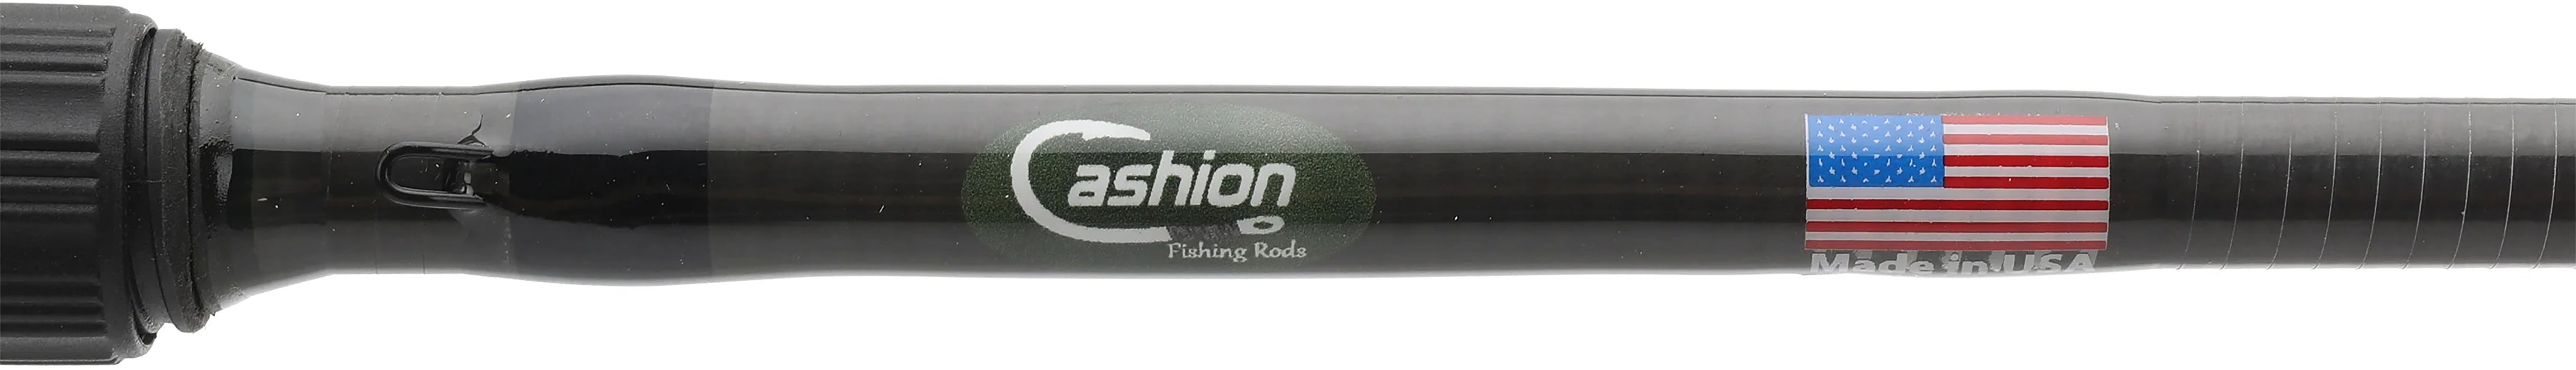 Cashion ICON Series Topwater/Jerkbait Casting Rods